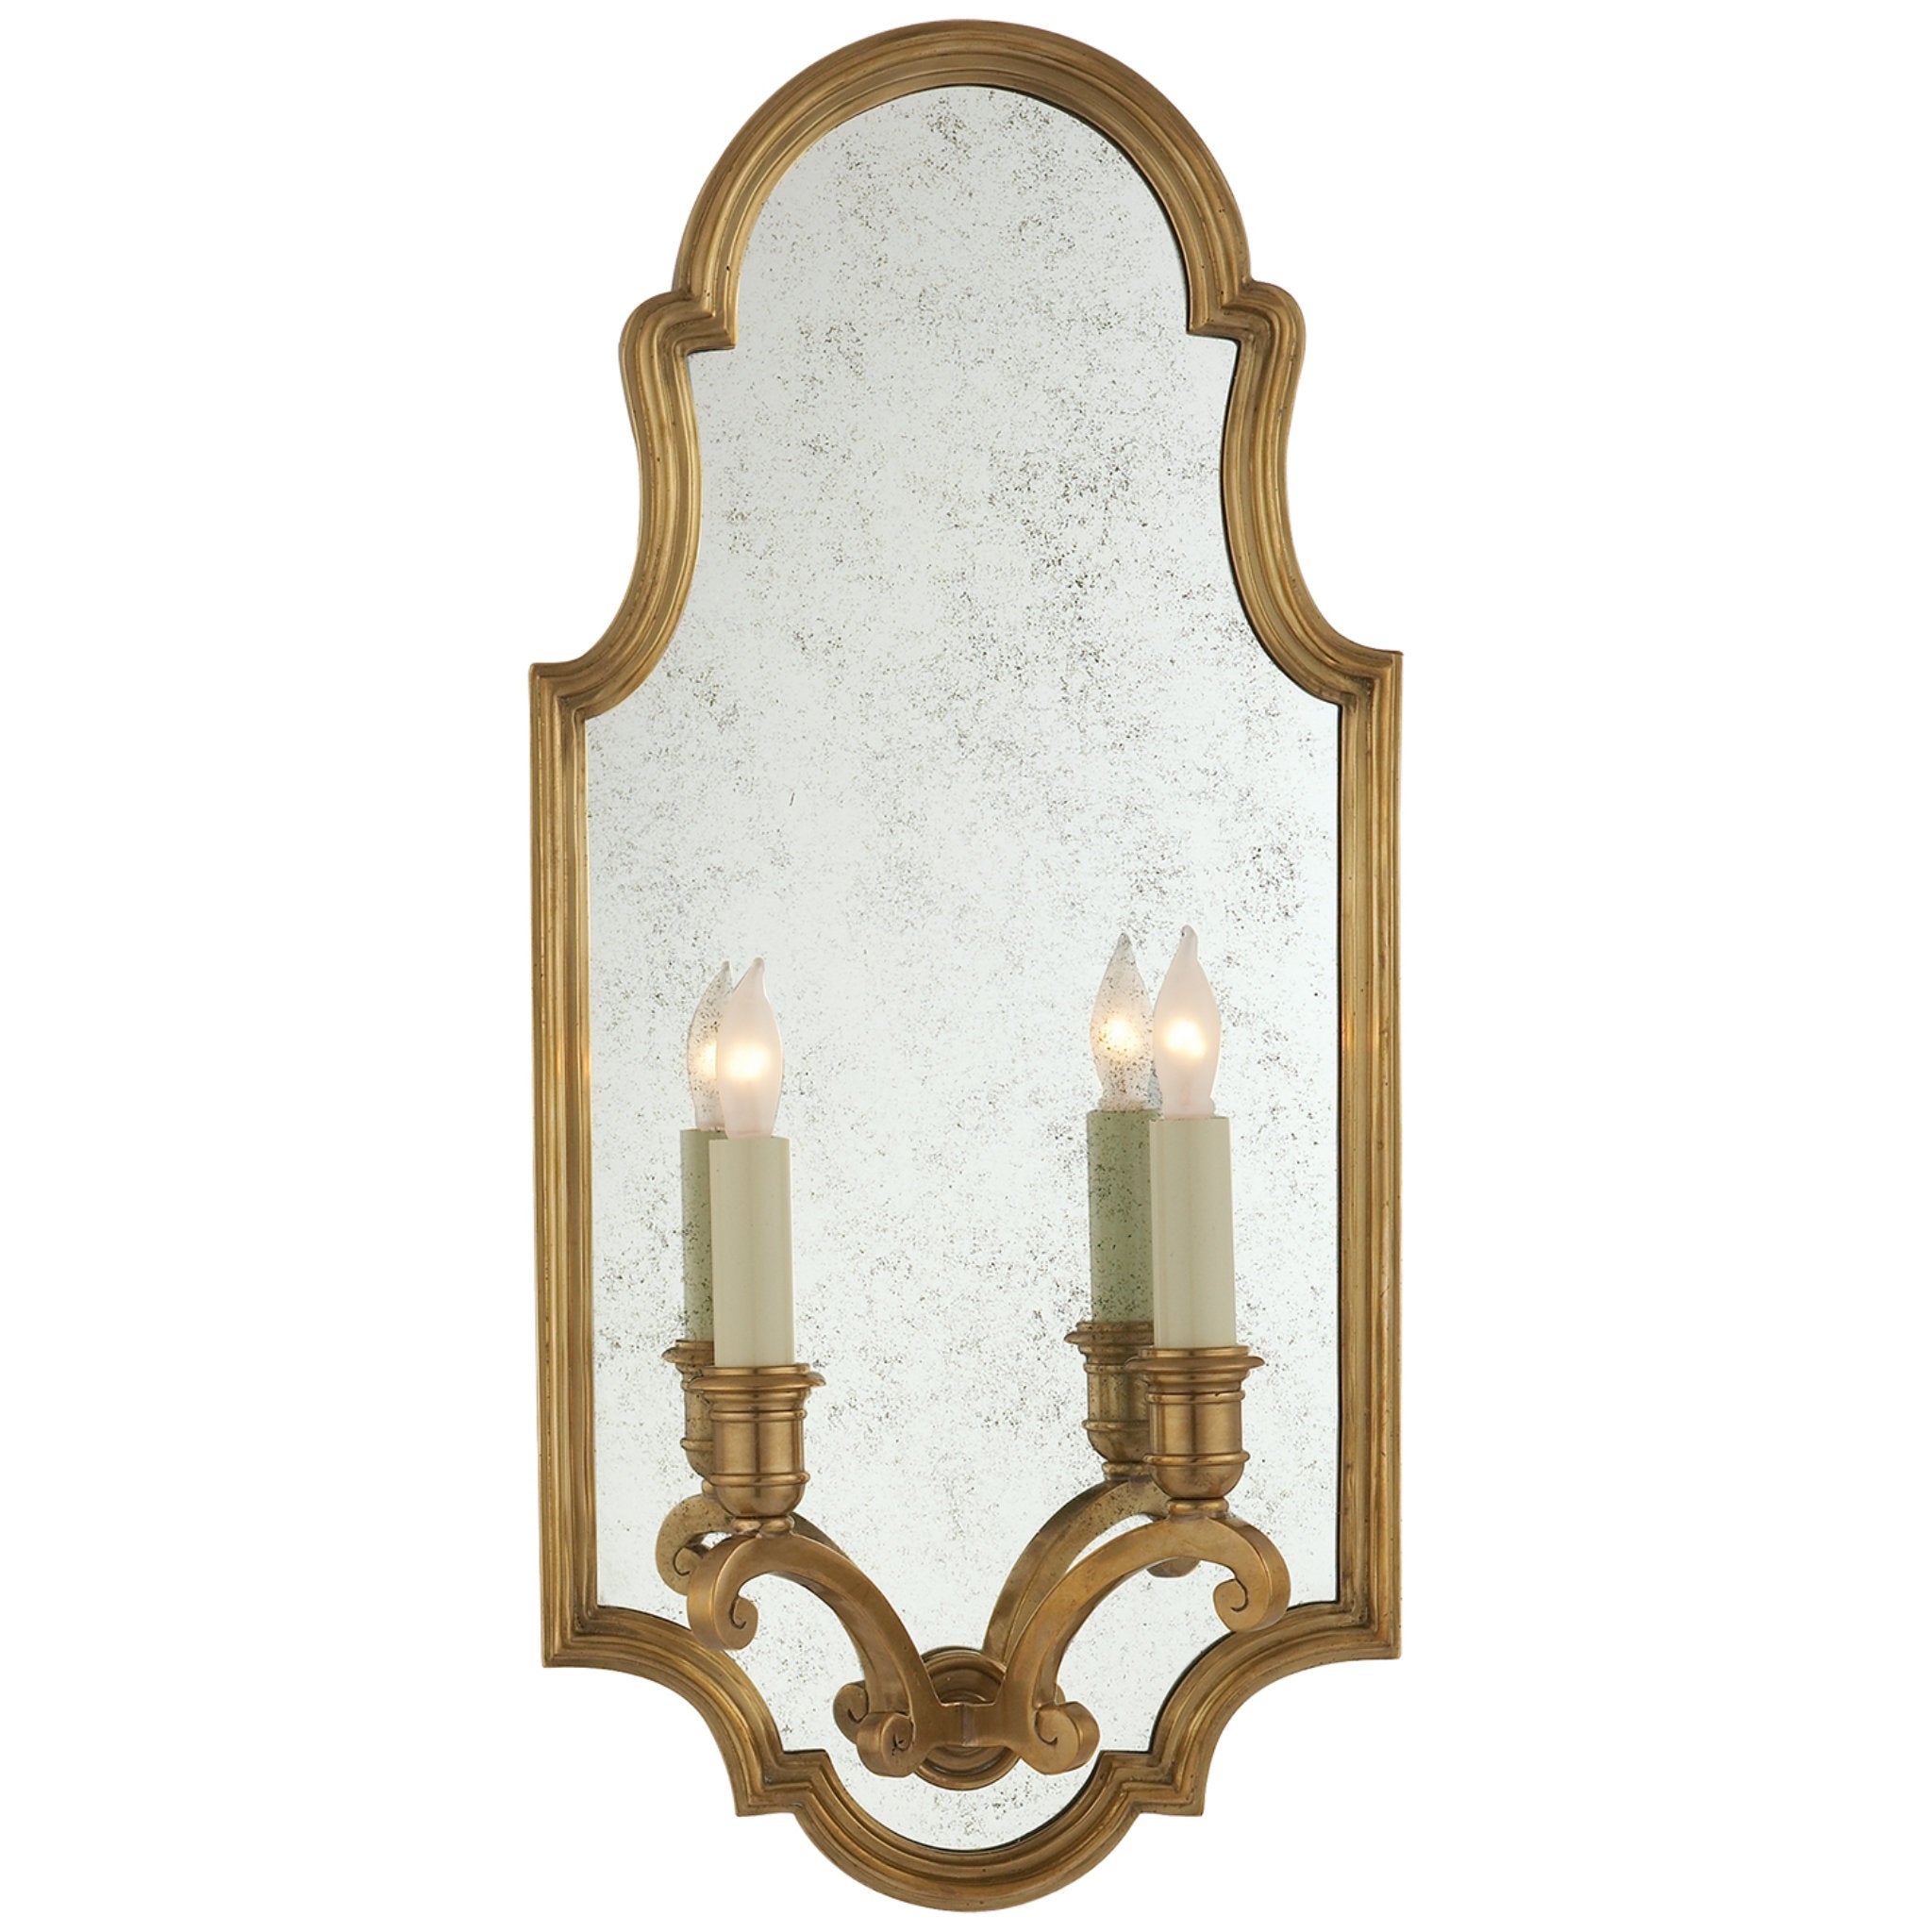 Chapman & Myers Sussex Medium Framed Double Sconce in Antique-Burnished Brass with Antique Mirror